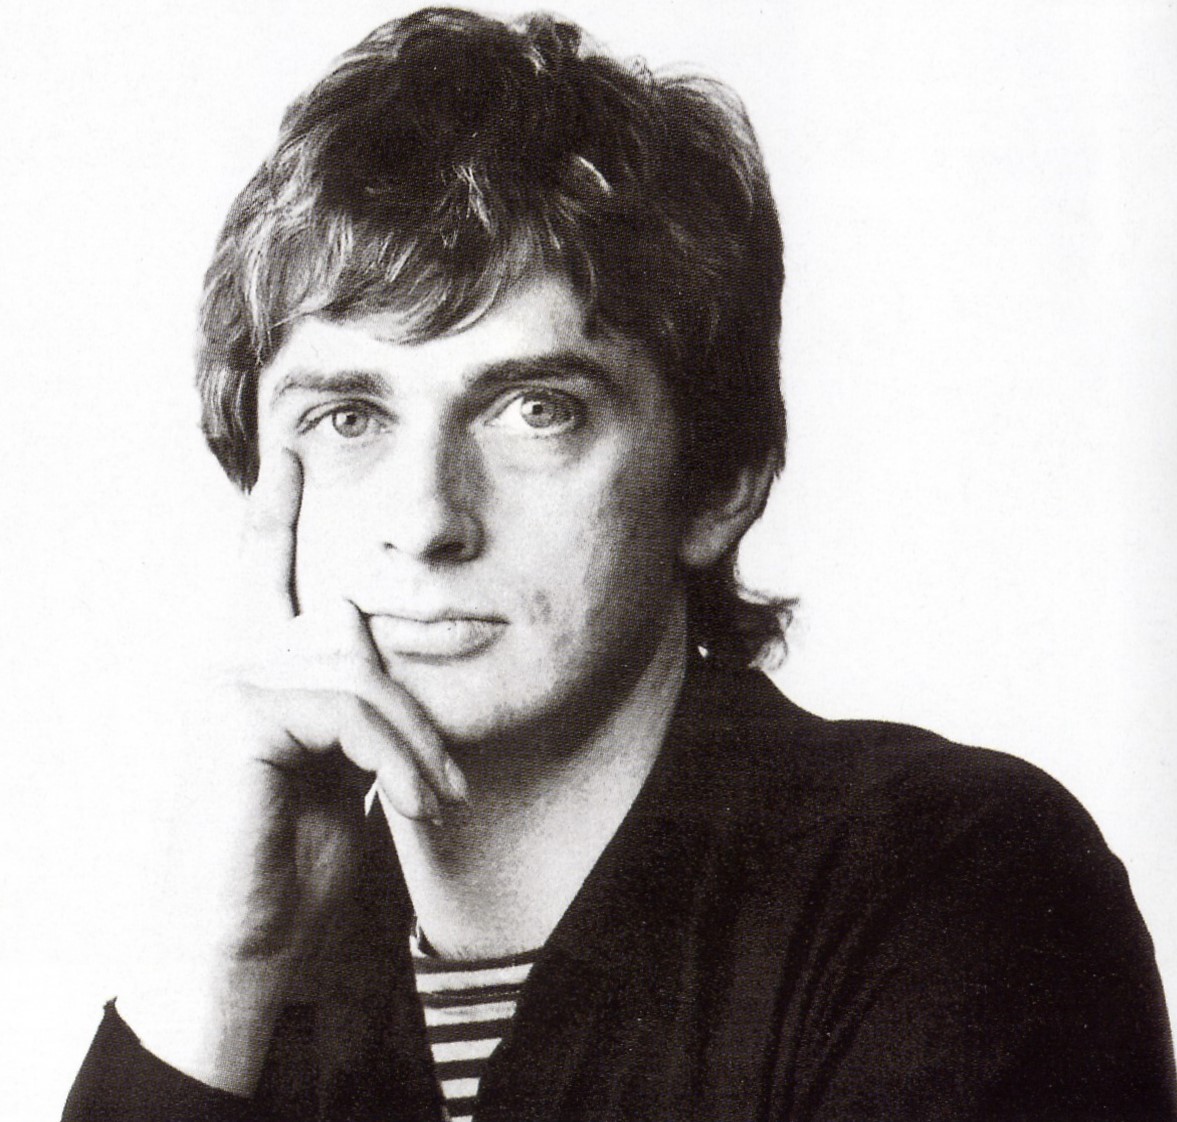 Nace Mike Oldfield